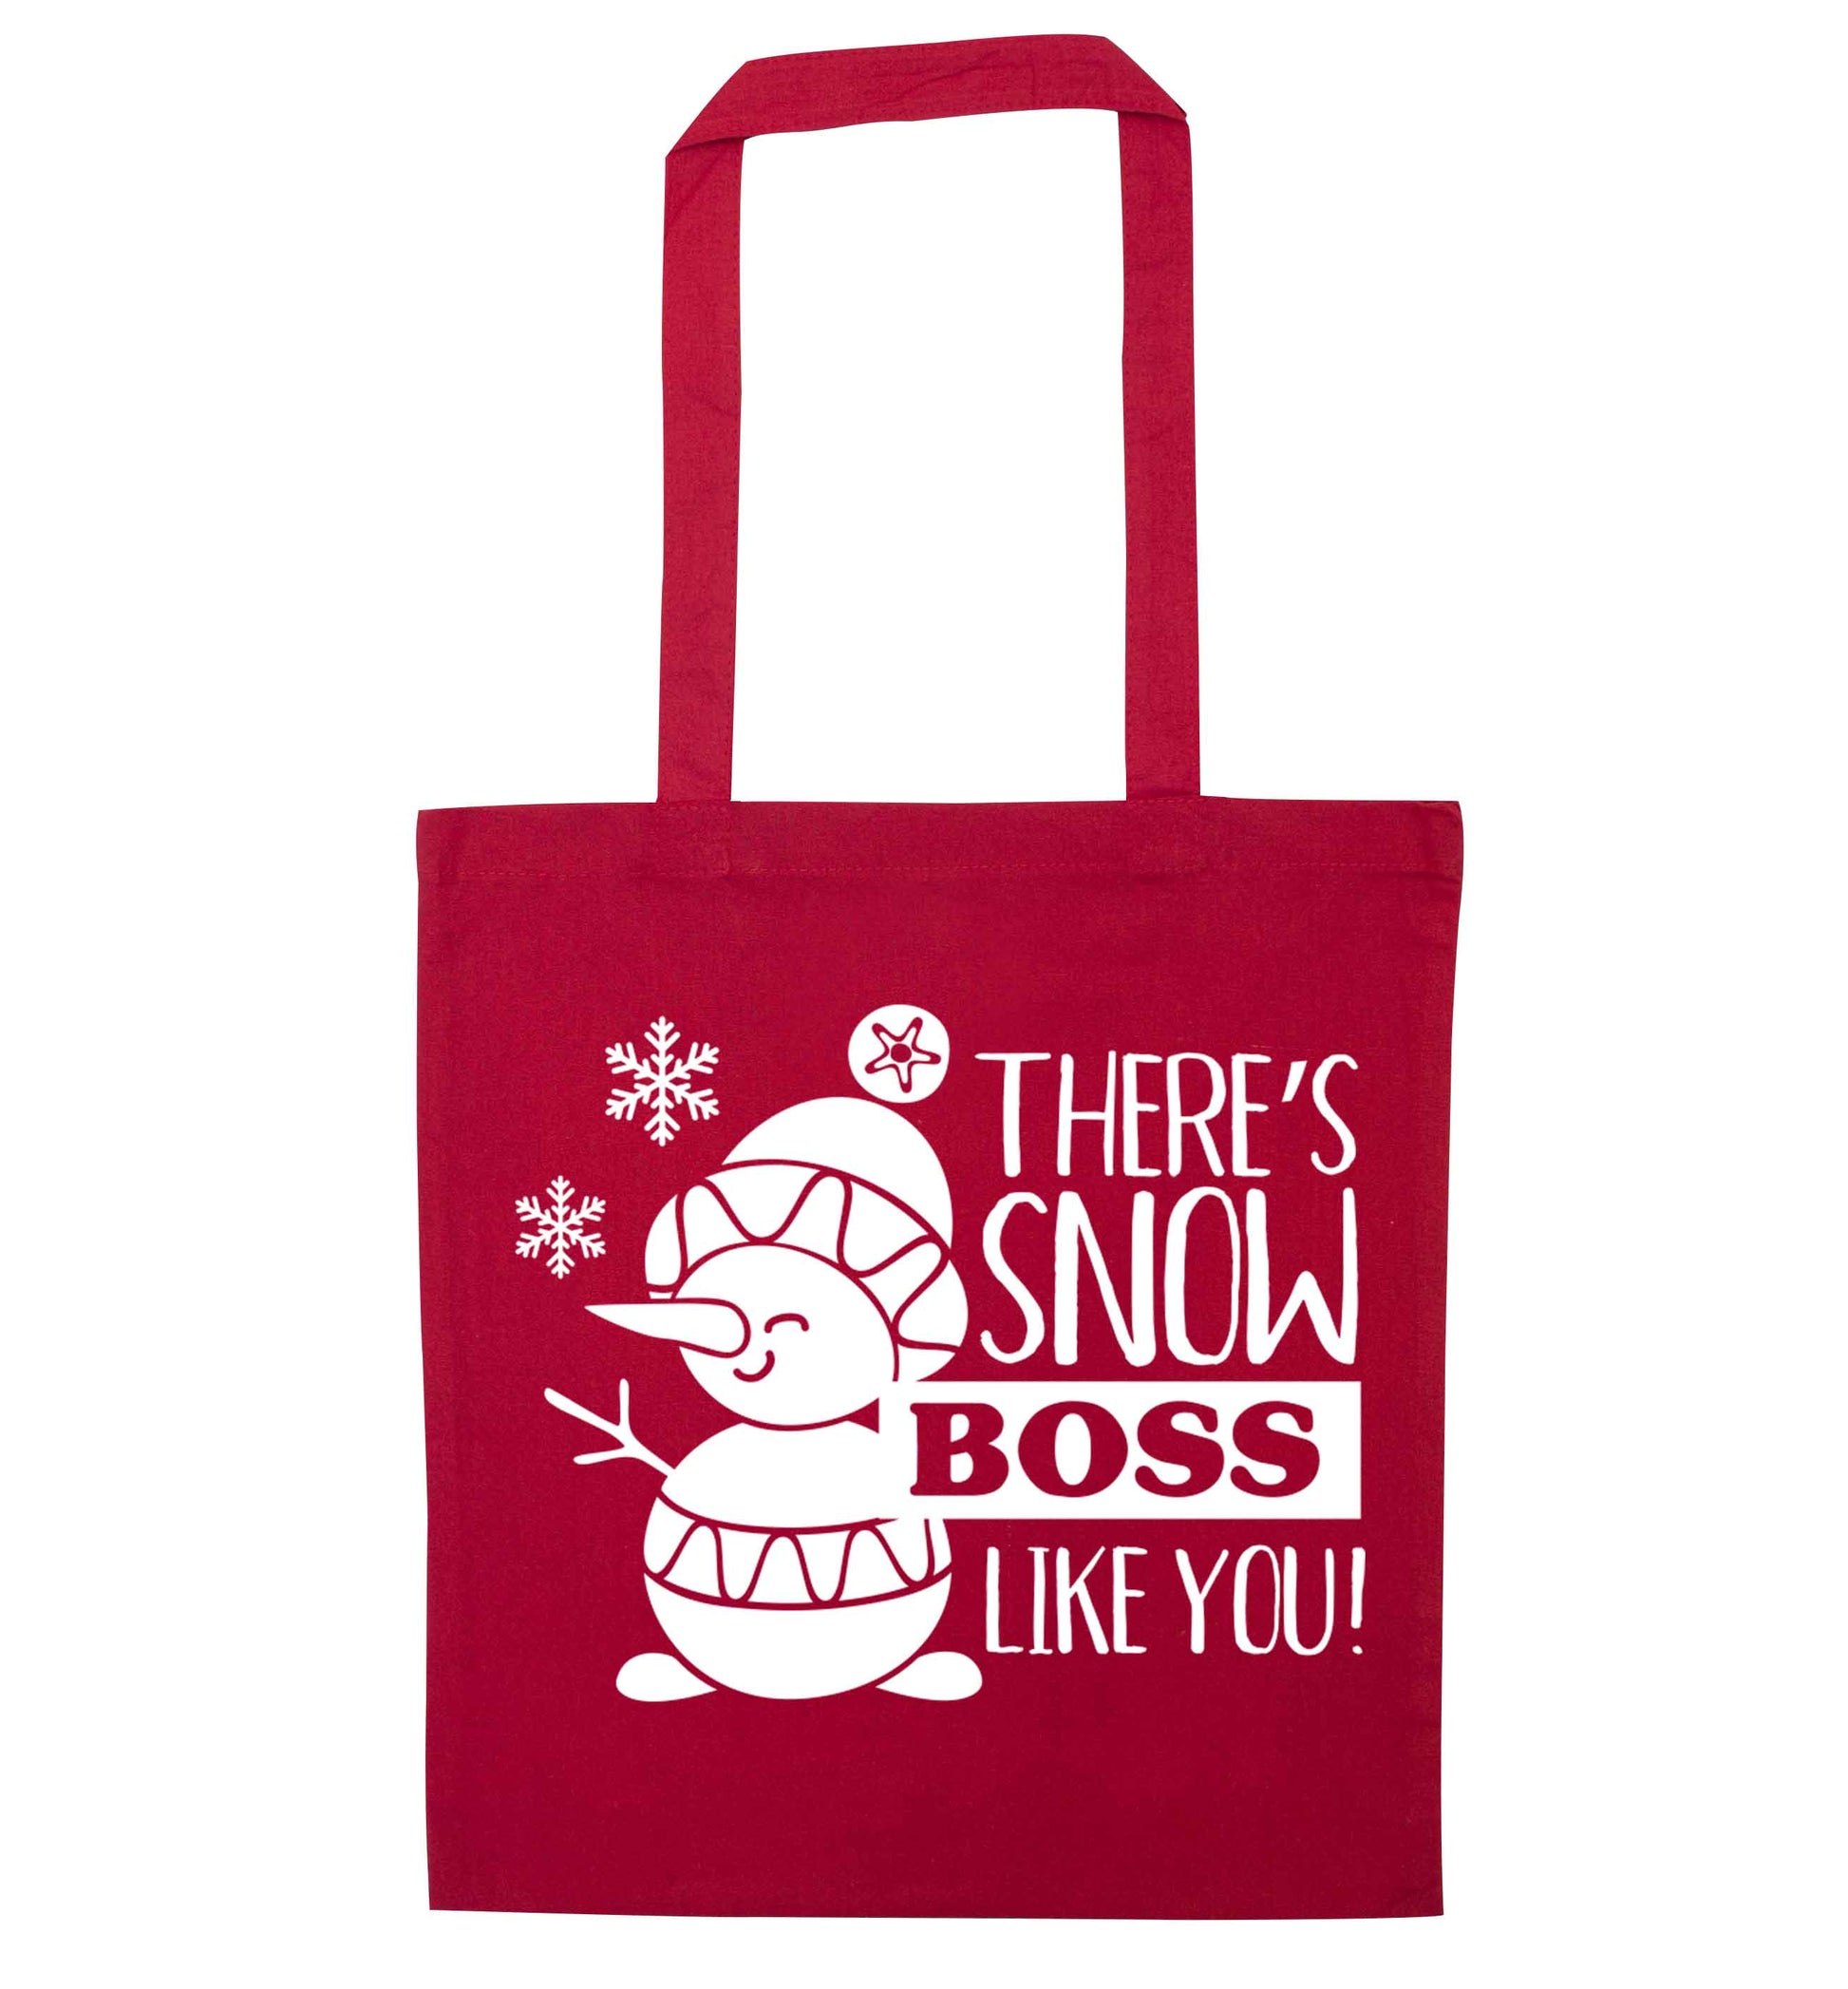 There's snow boss like you red tote bag